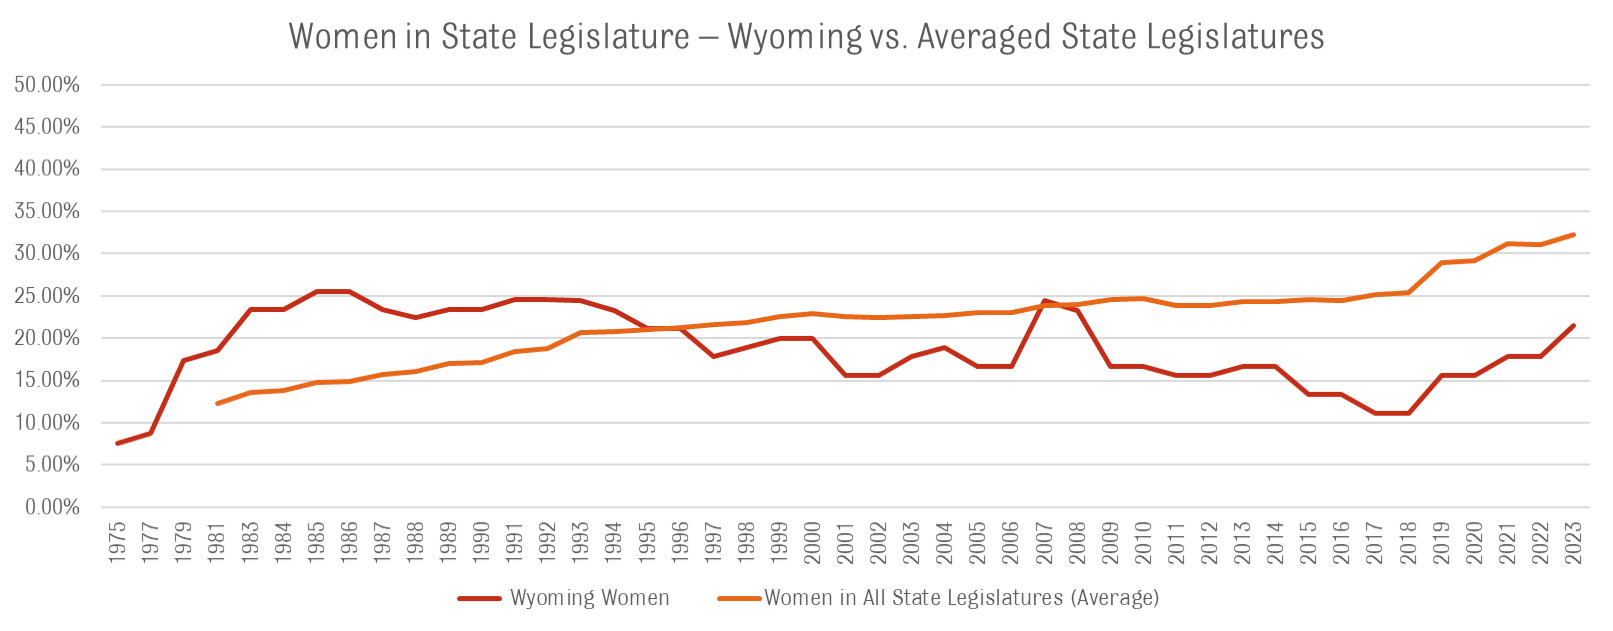 Information obtained from Center for American Women and Politics (CAWP), Eagleton Institute of Politics, Rutgers University, provided by the Wyoming Women’s Foundation.